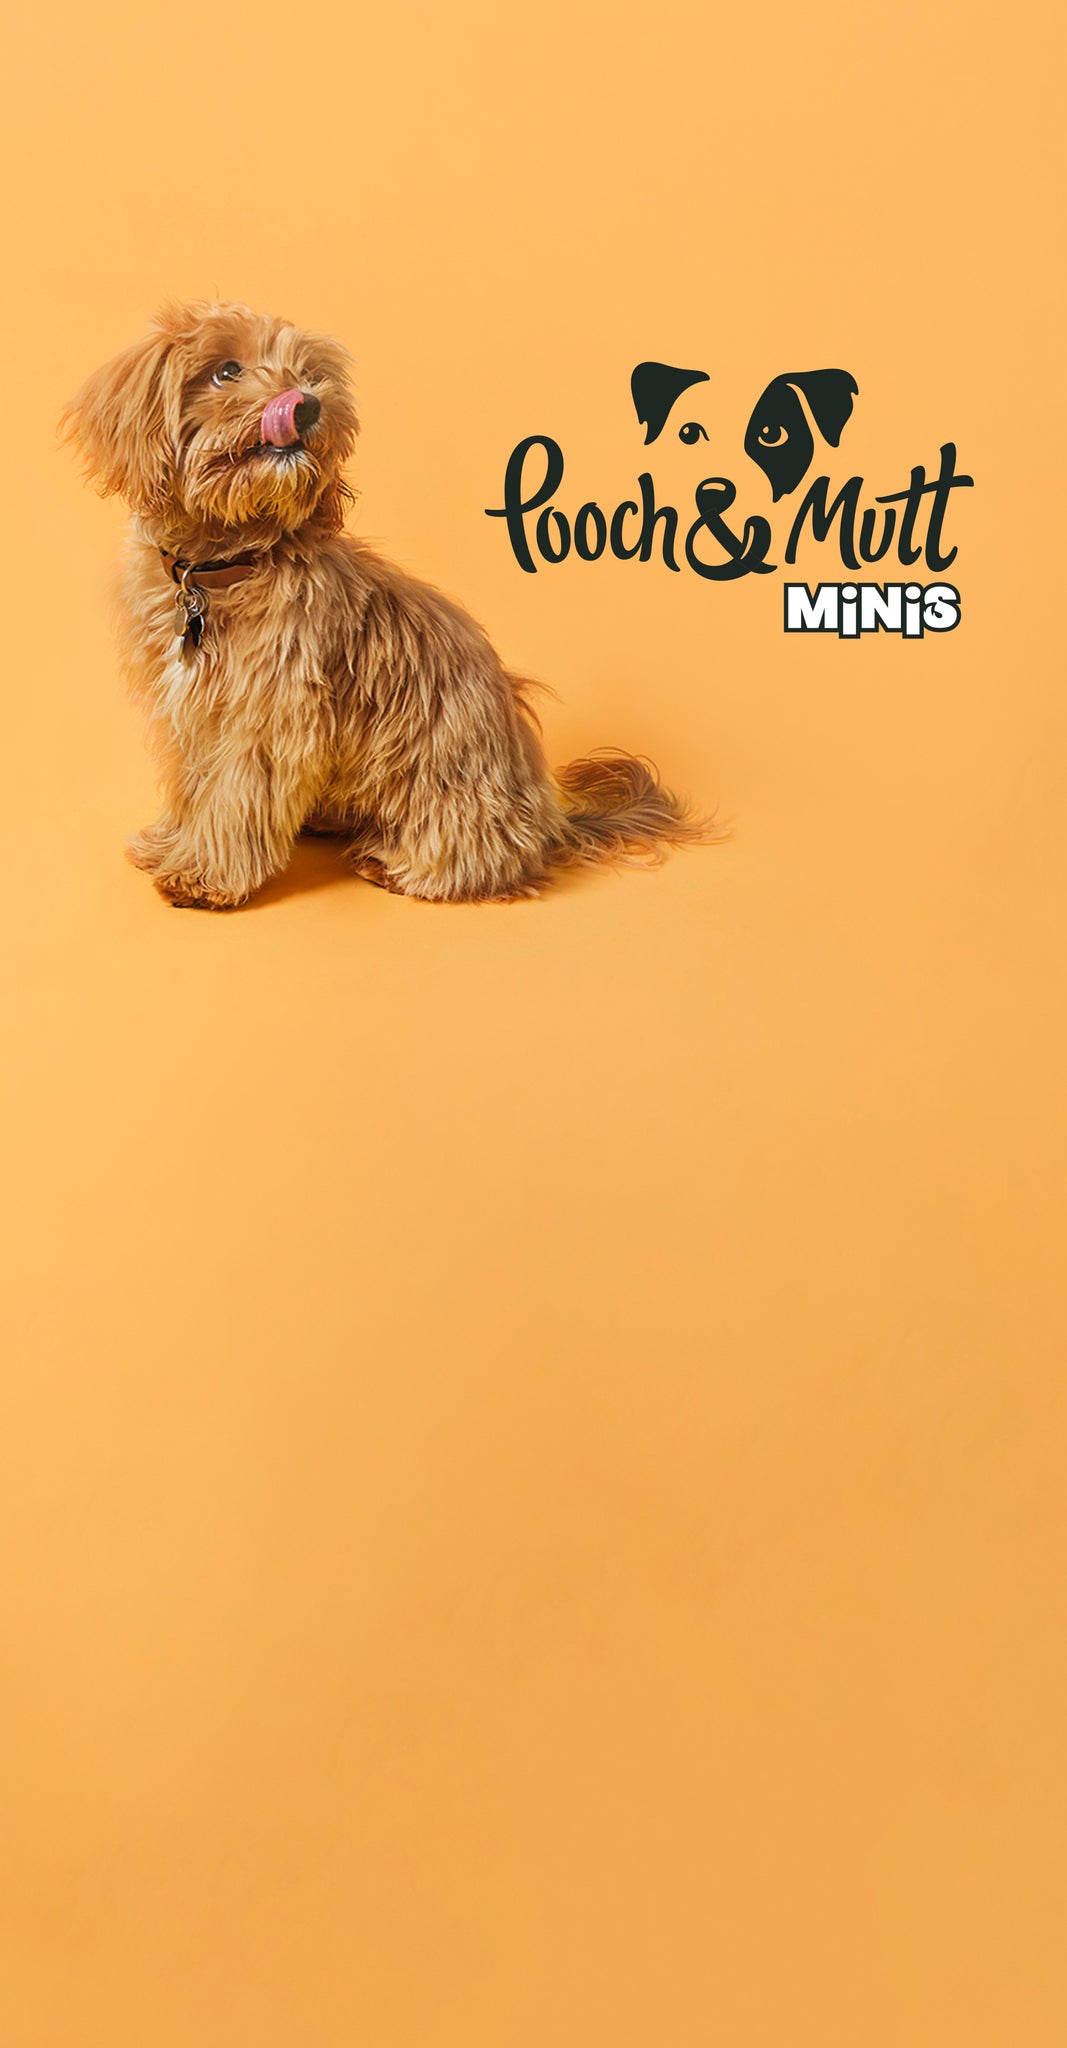 Small brown dog on a yellow background next to the pooch and mutt logo portrait